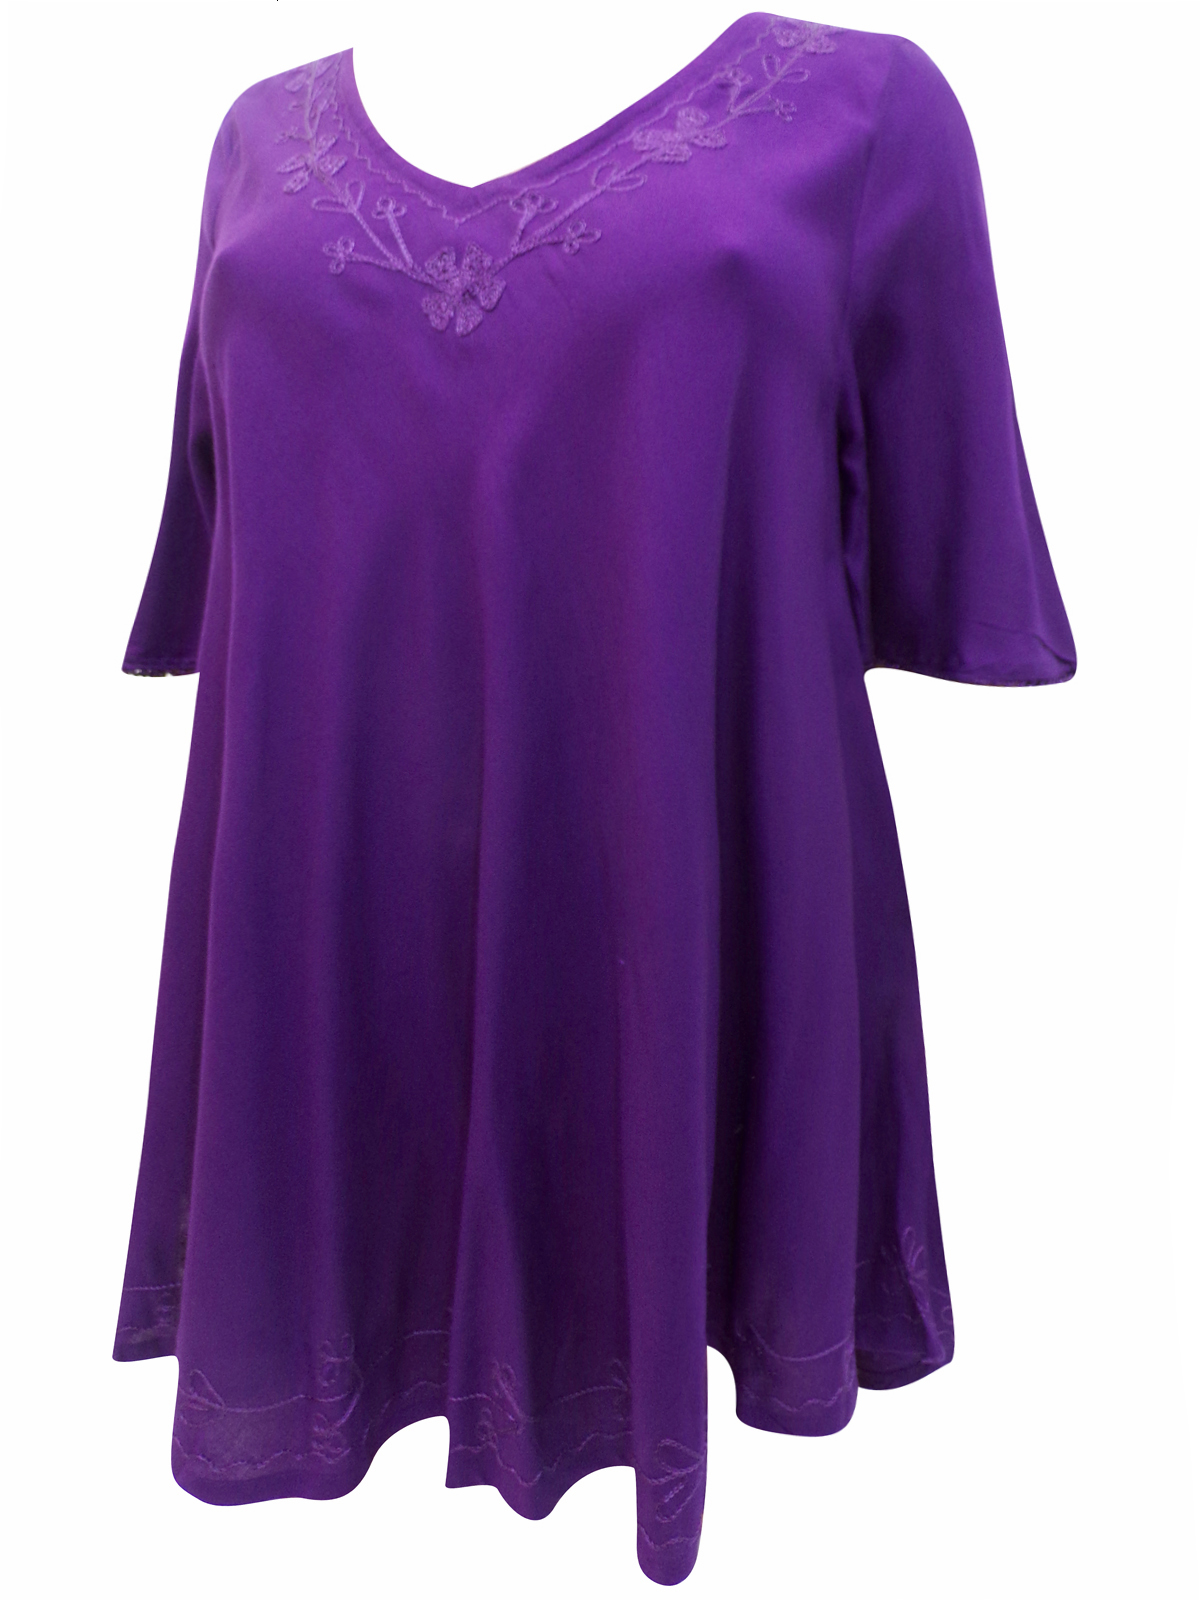 eaonplus PURPLE Embroidered Trim Curved Hem Blouse - Plus Size 18 to 32